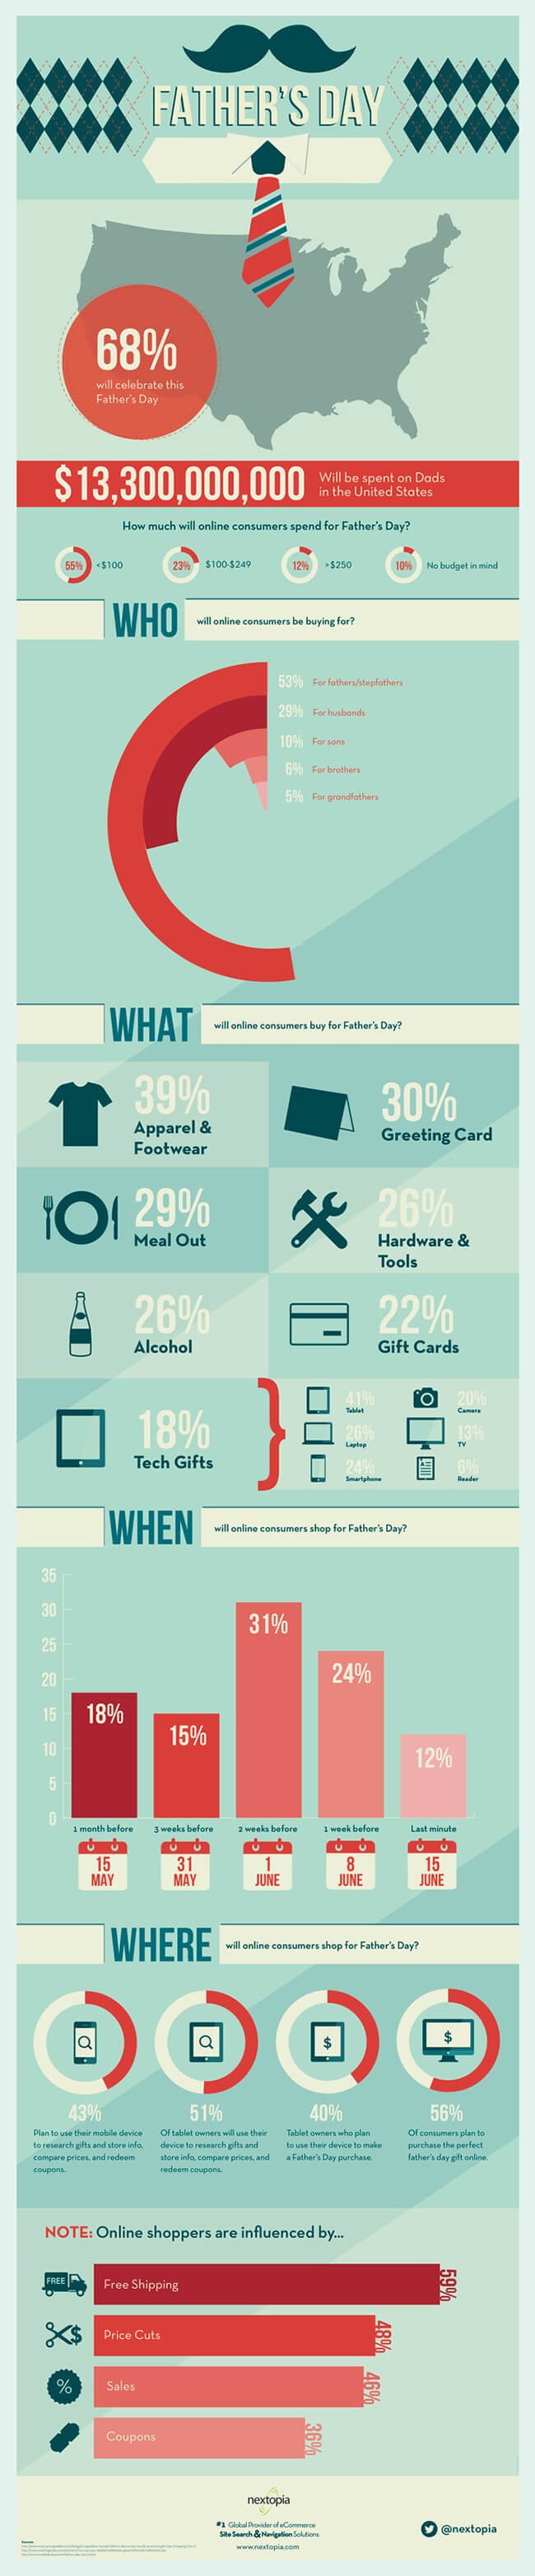 Fathers Day eCommerce Facts